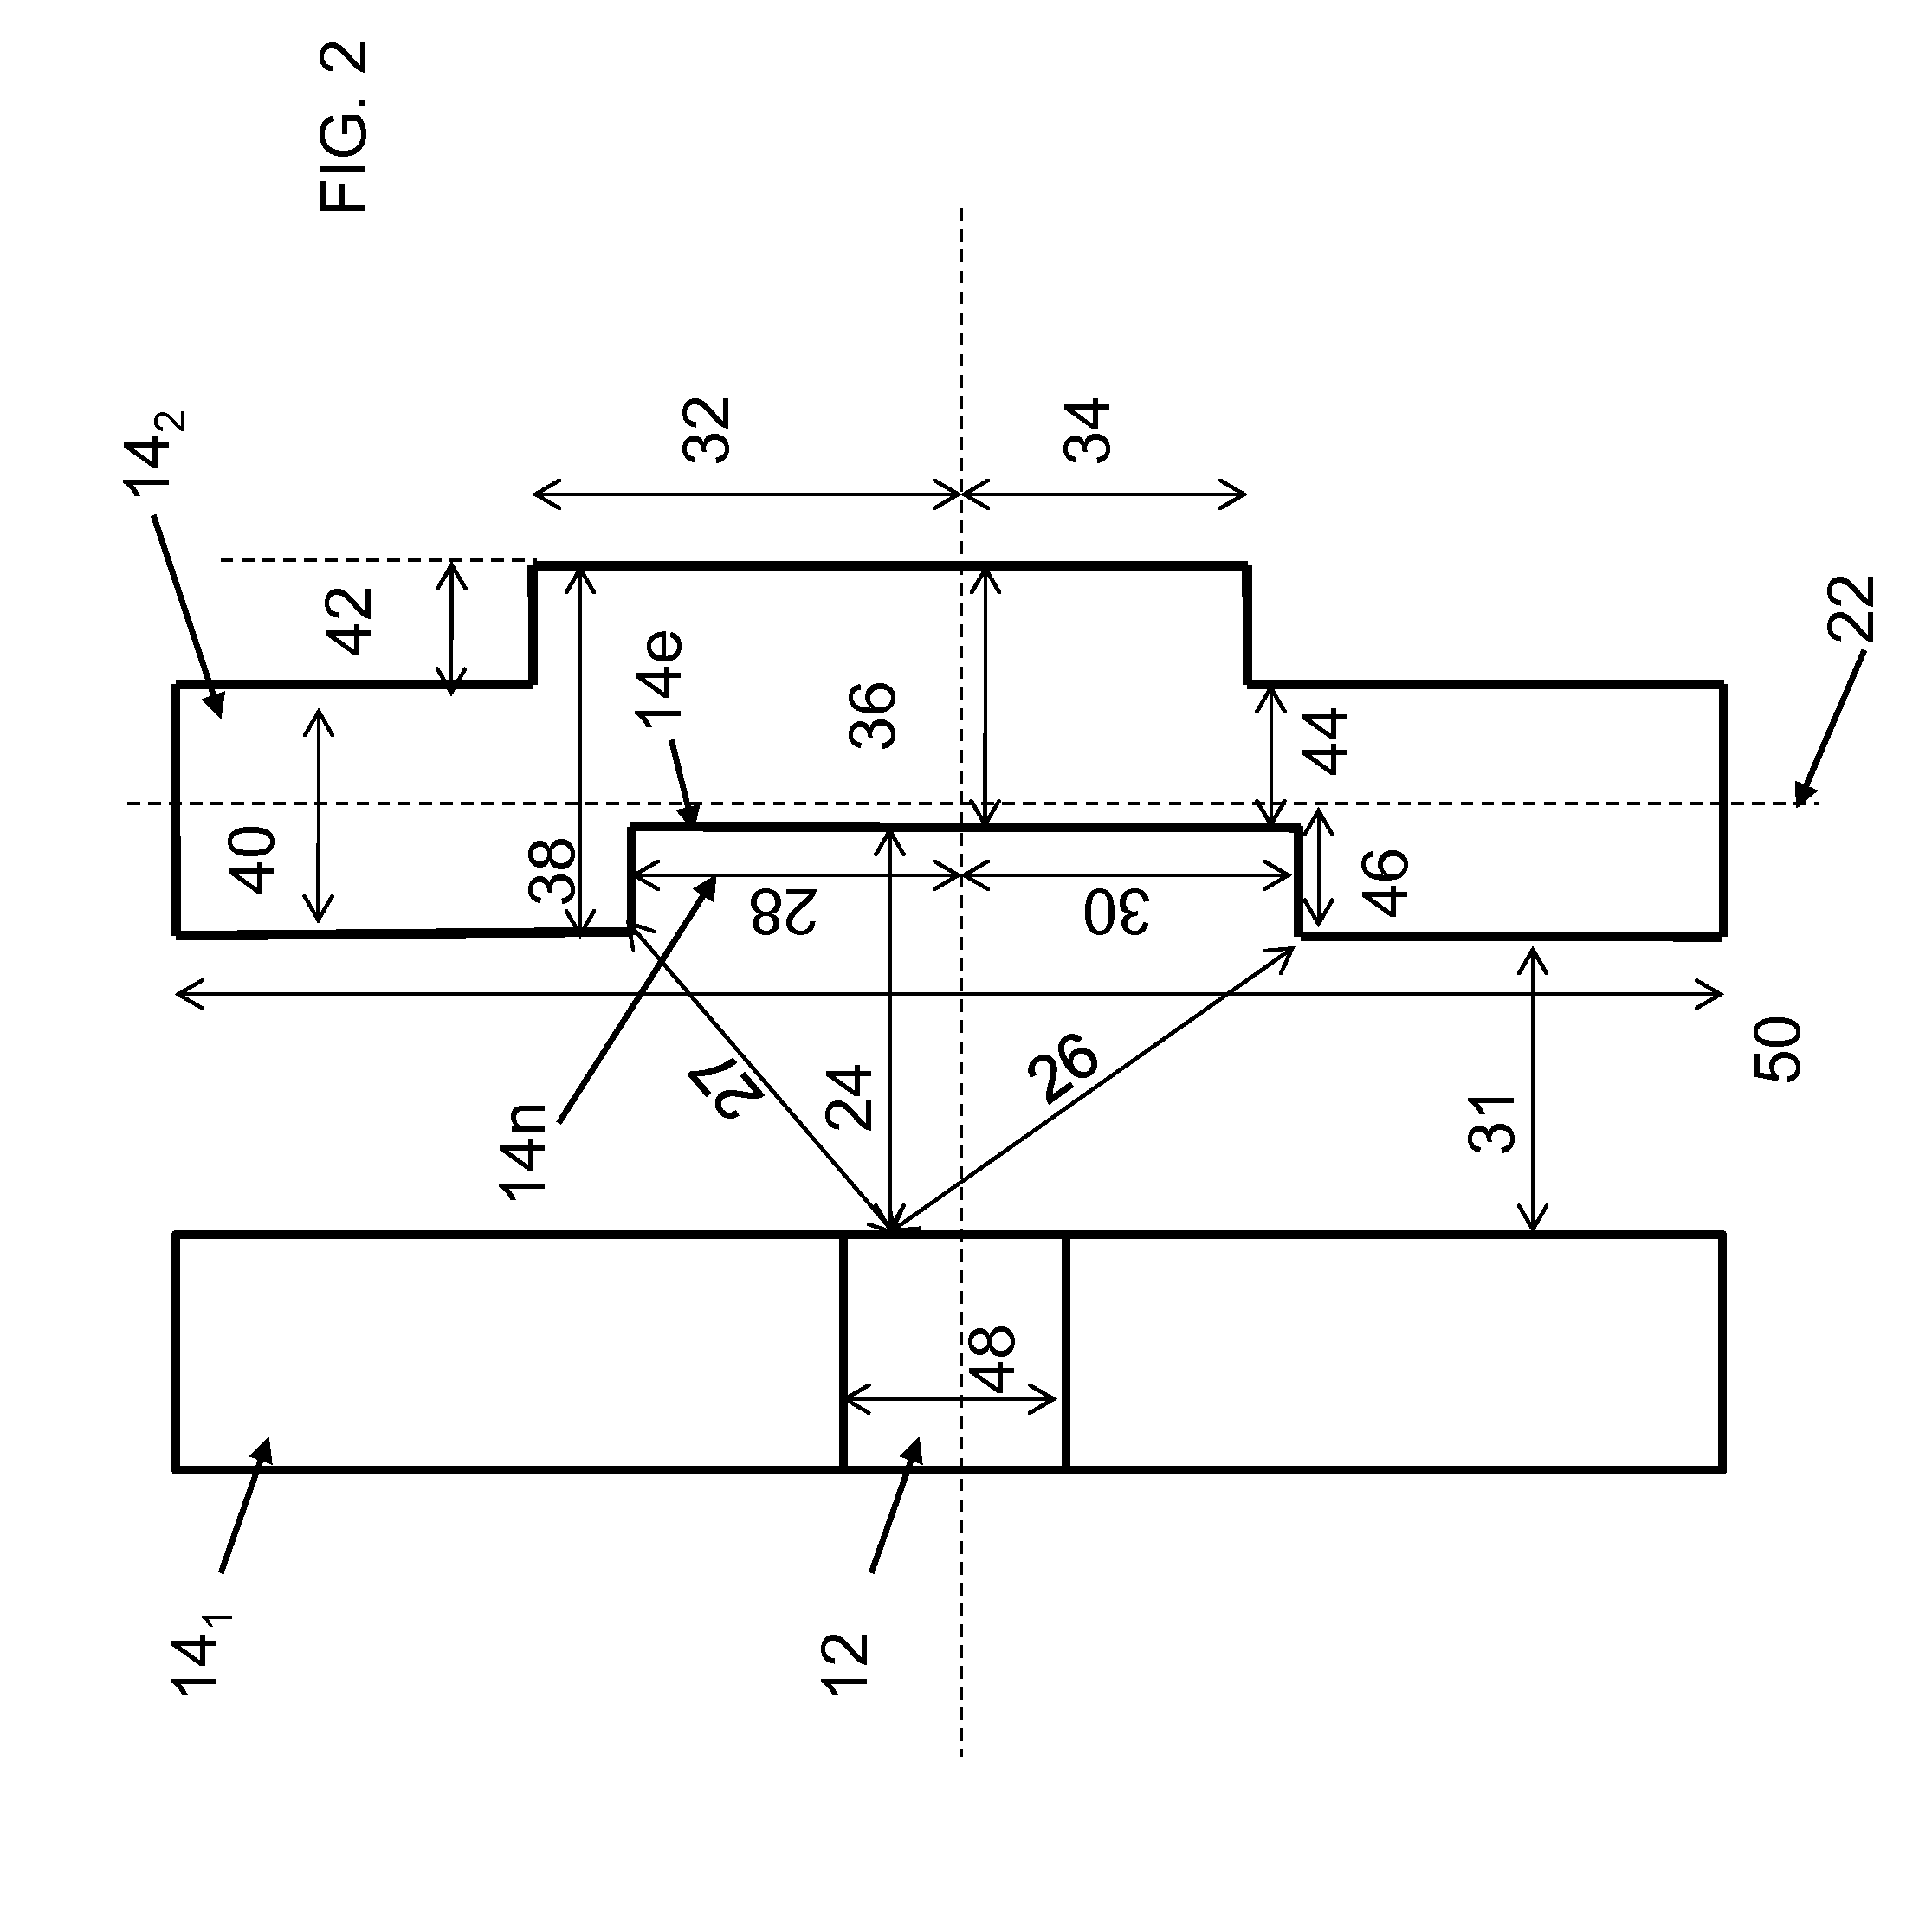 IC layout adjustment method and tool for improving dielectric reliability at interconnects